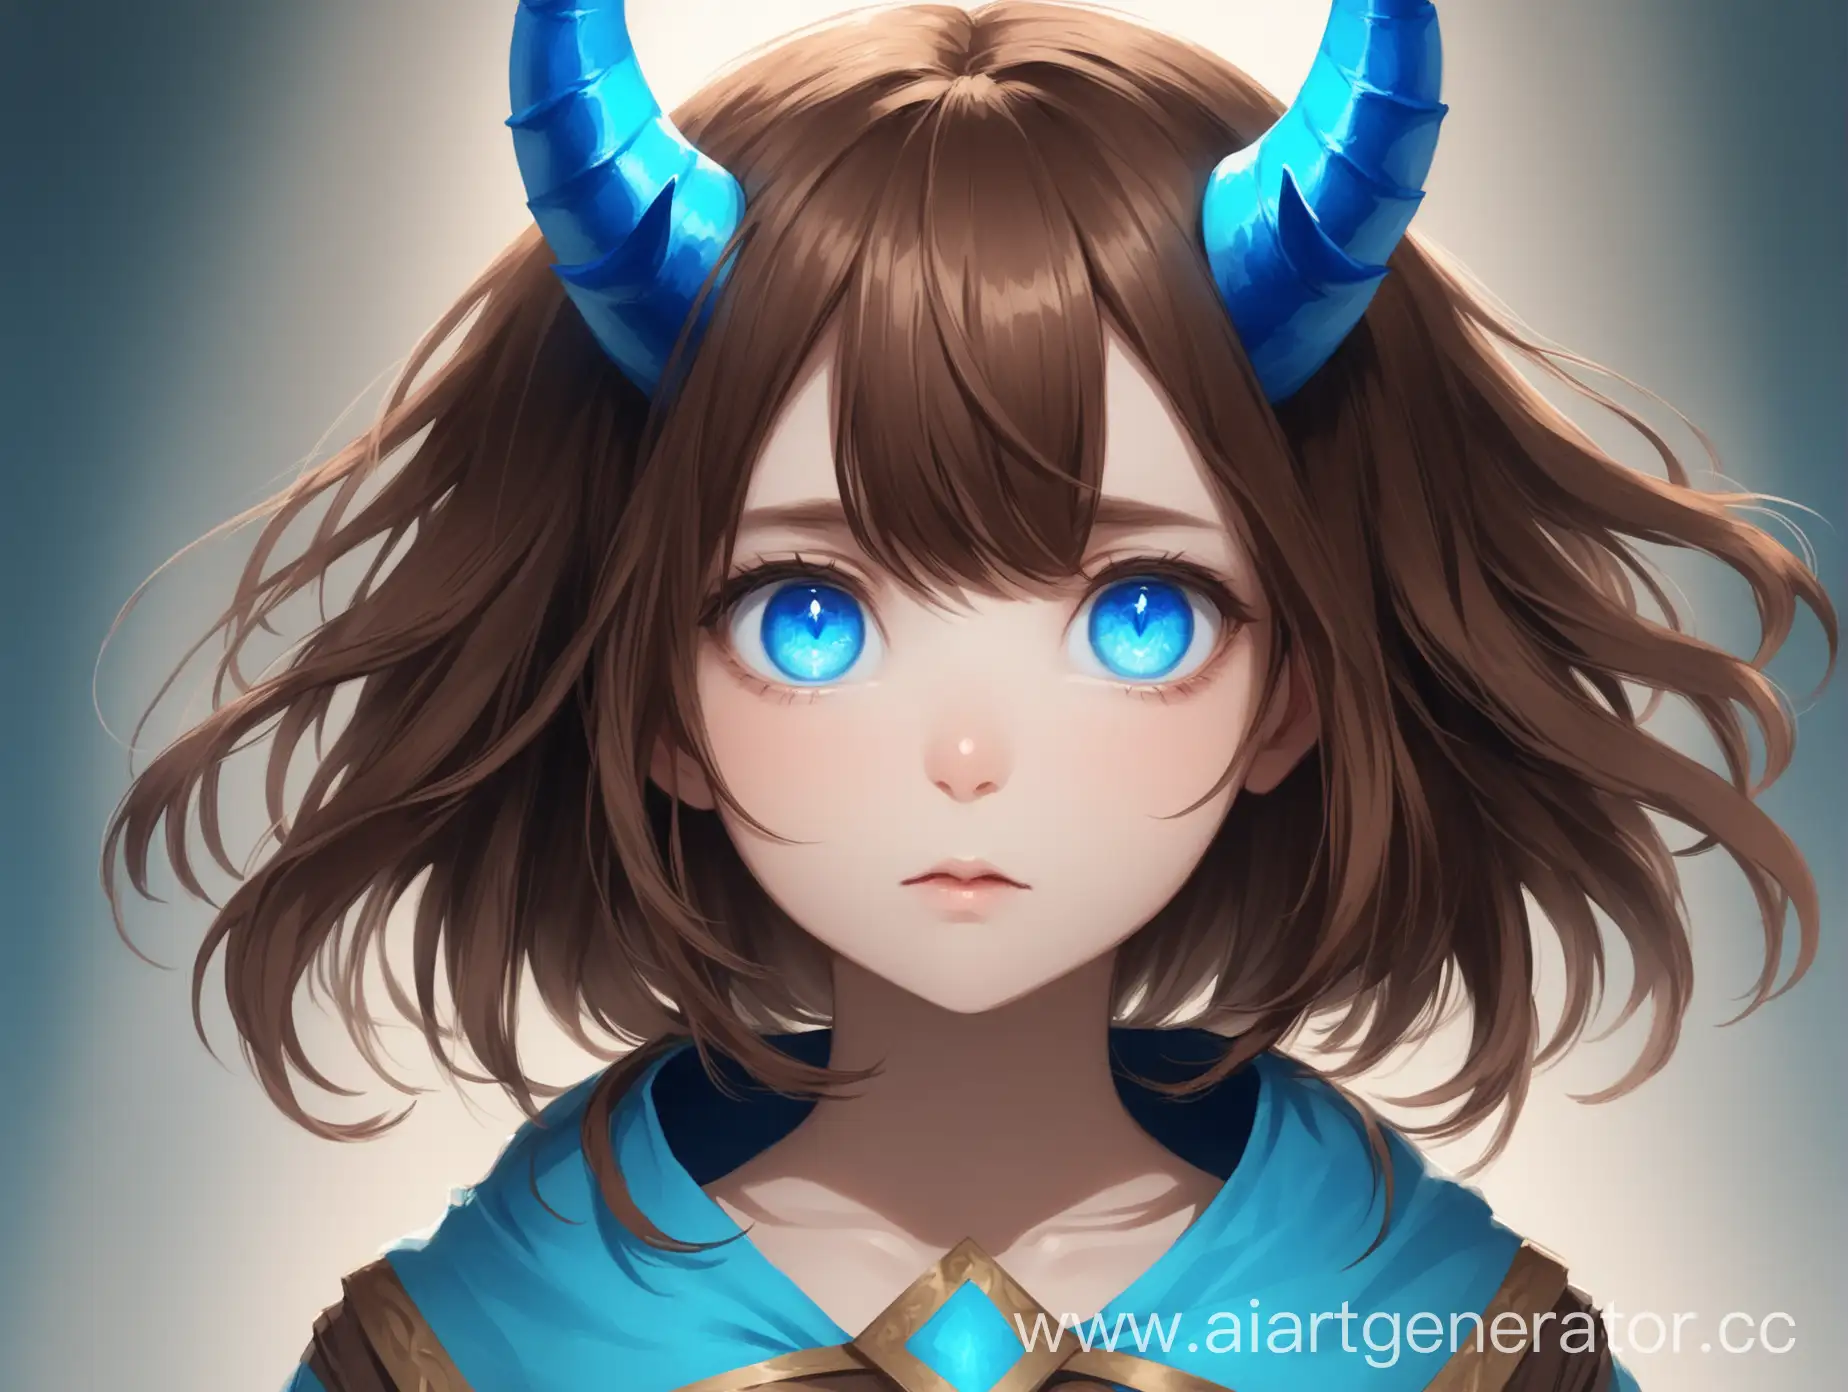 a girl with brown hair, blue horns in the front and blue eyes.